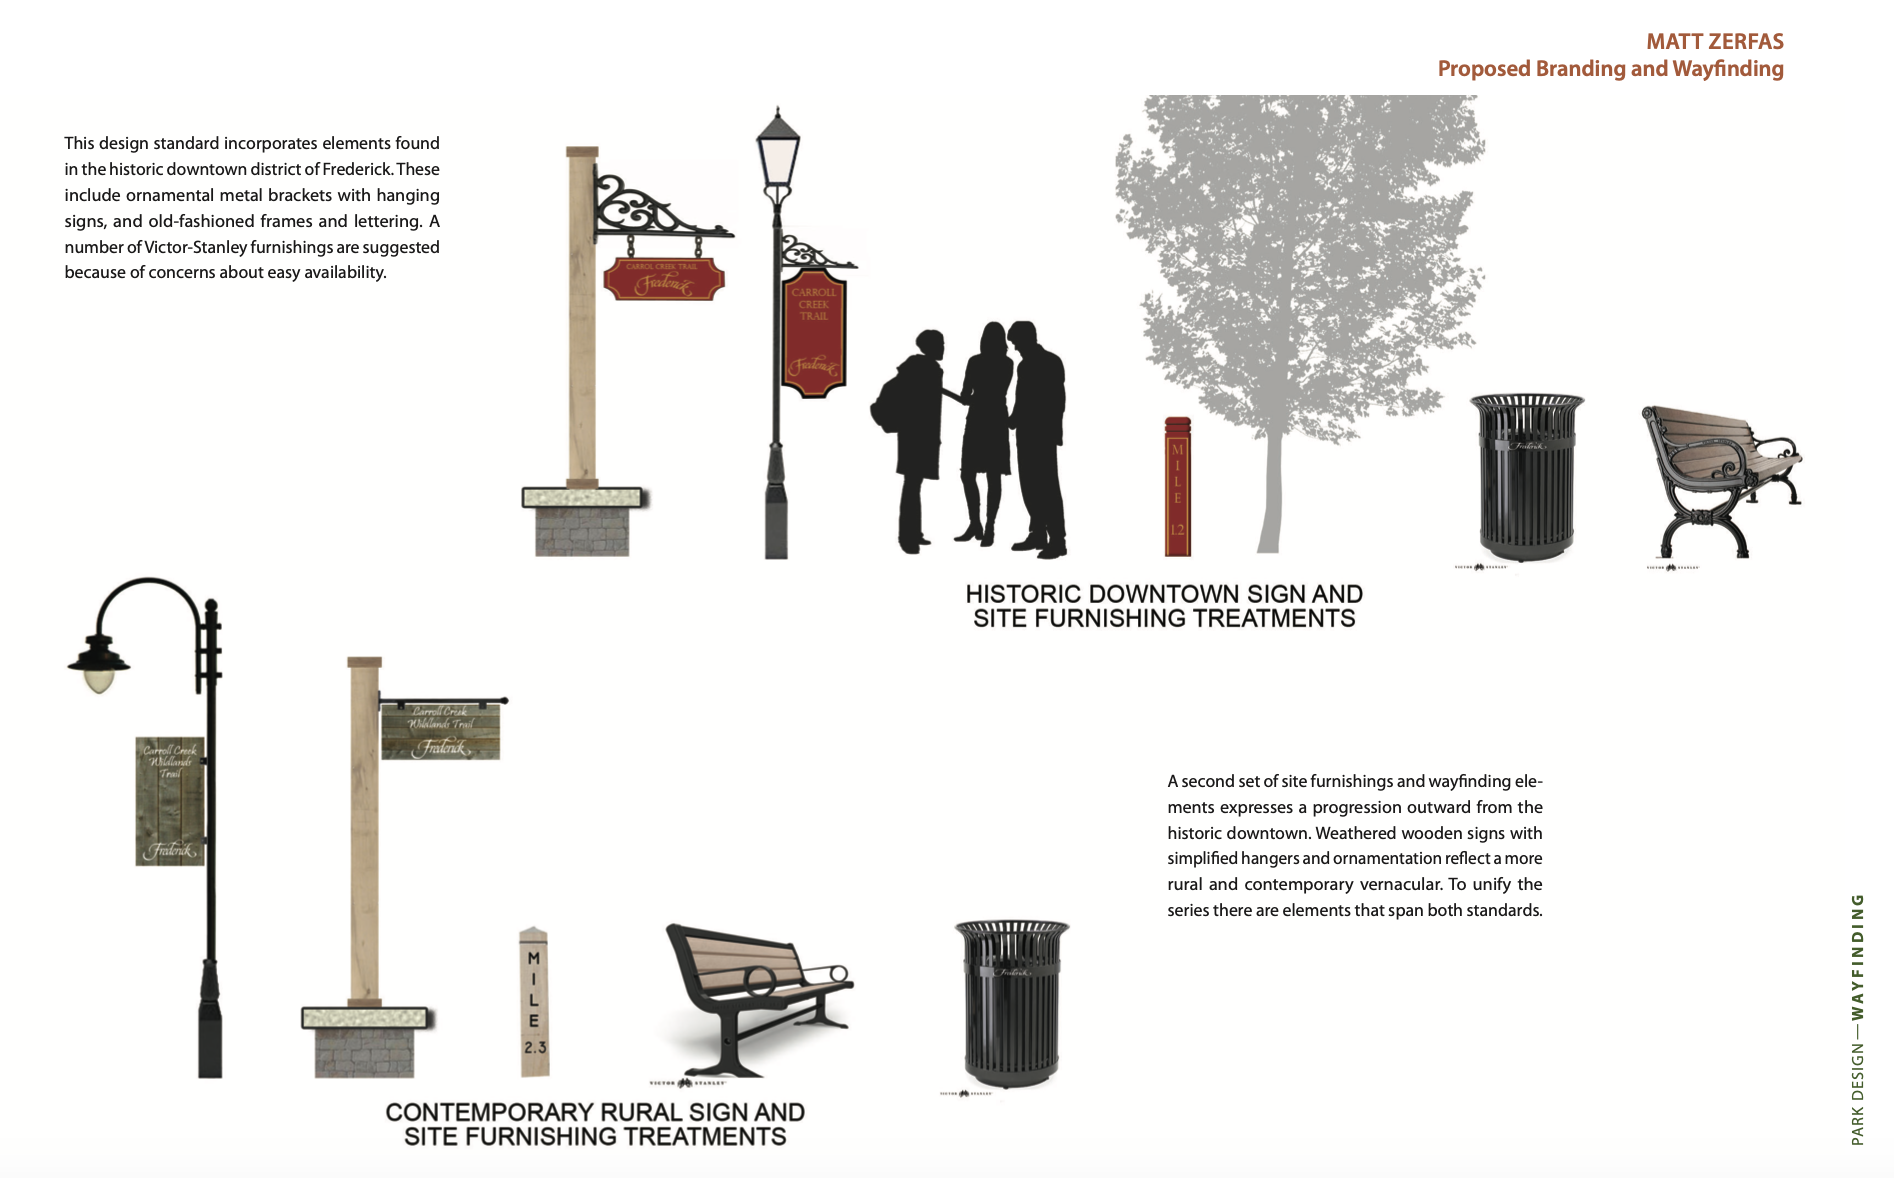 Proposed Branding and Wayfinding 